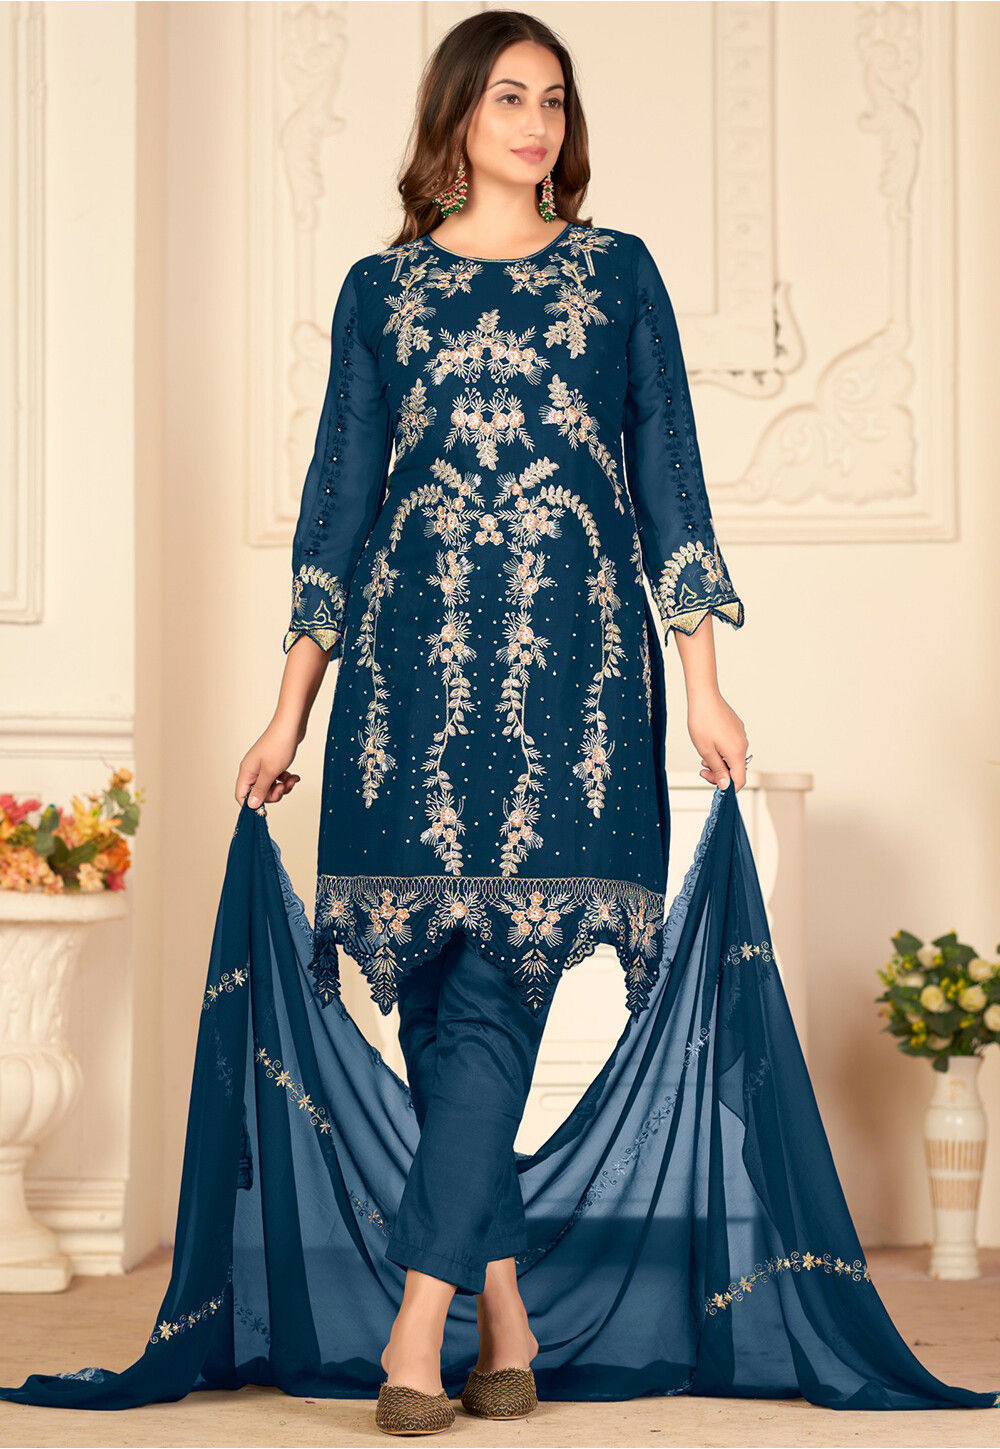 Embroidered Georgette Pakistani Suit in Teal Blue : KGJ110